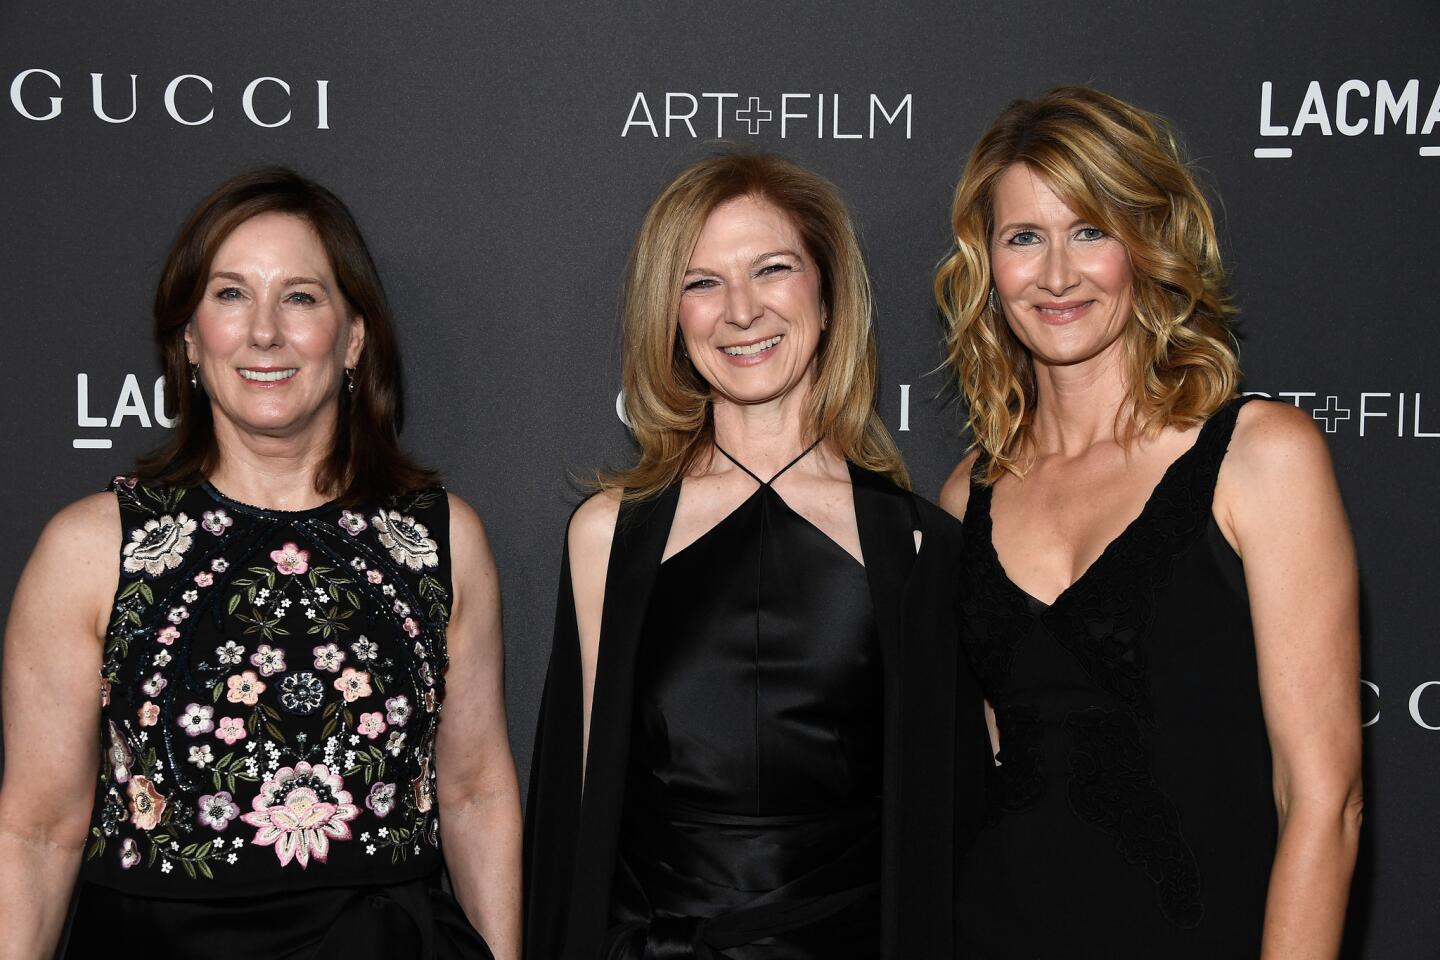 A-List Celebrities Flock To LACMA’s Urban Light Display For Art And Film Gala